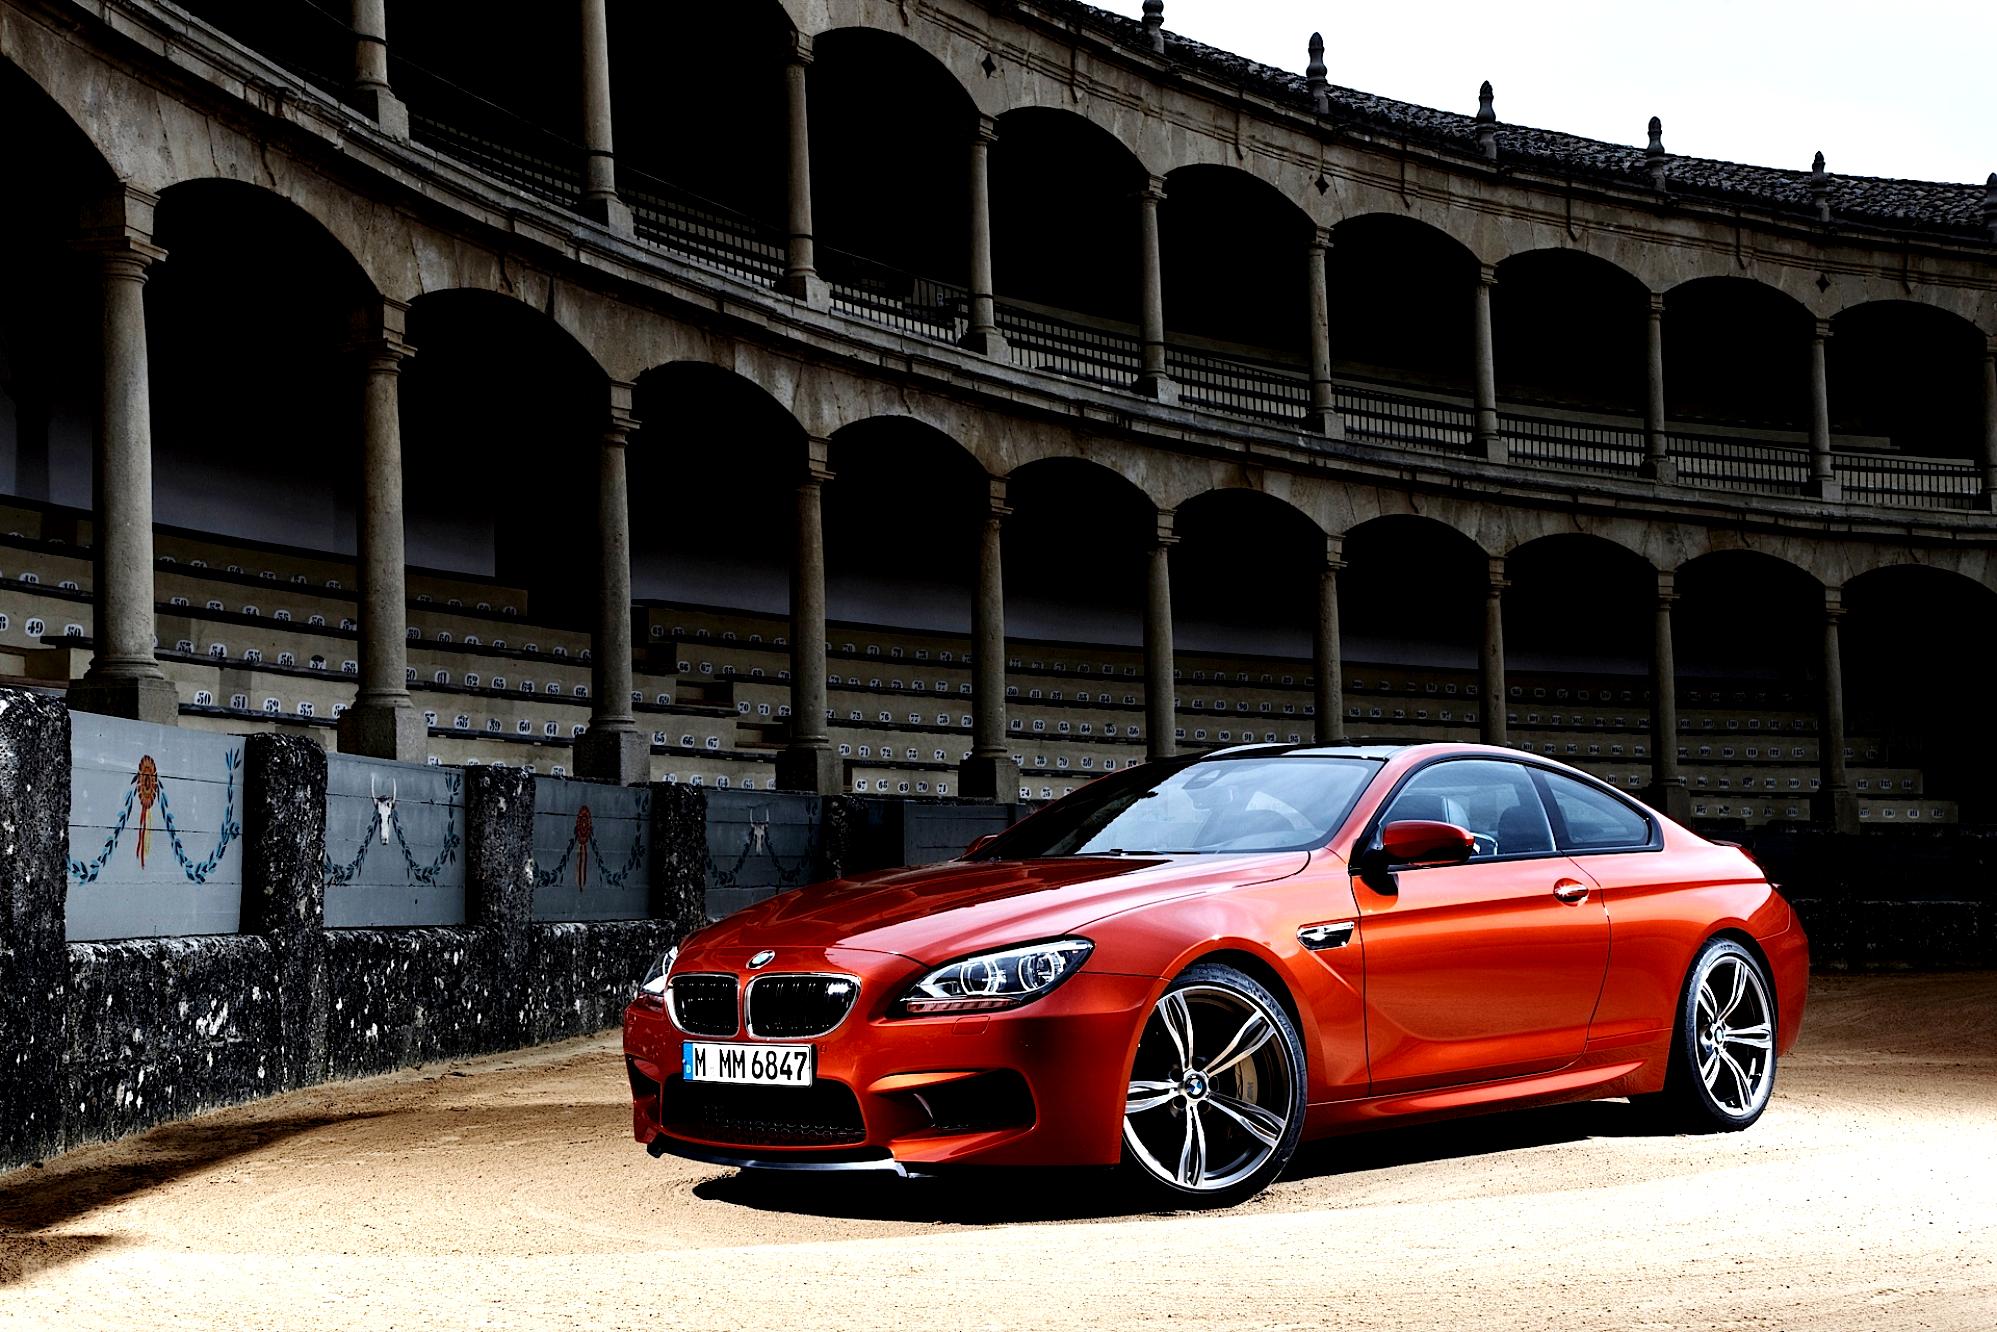 BMW M6 Coupe F13 2012 #101